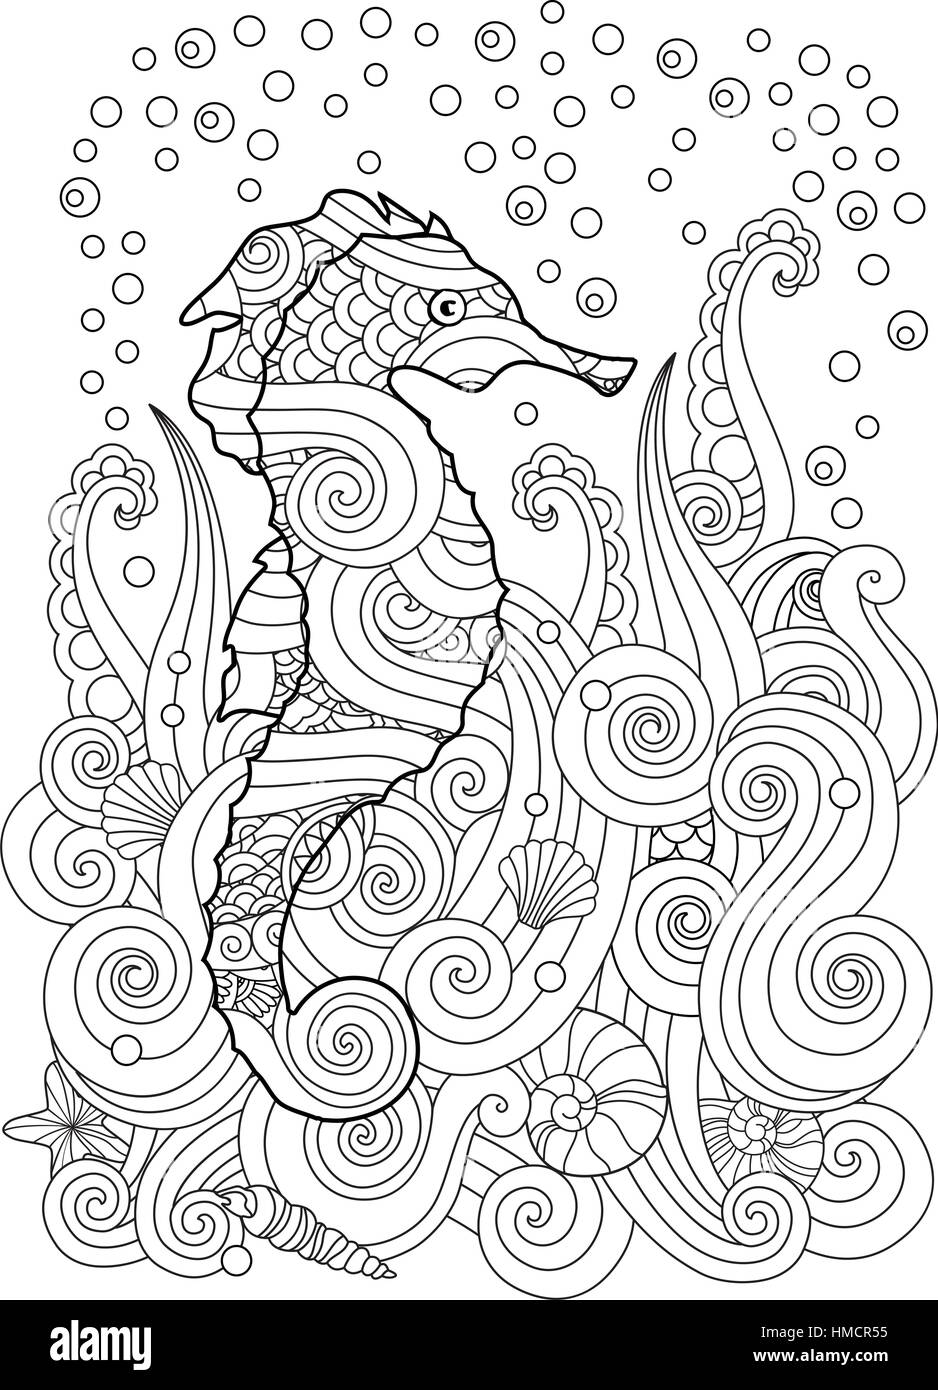 Hand drawn sketch of seahorse under the sea in zentangle inspired style